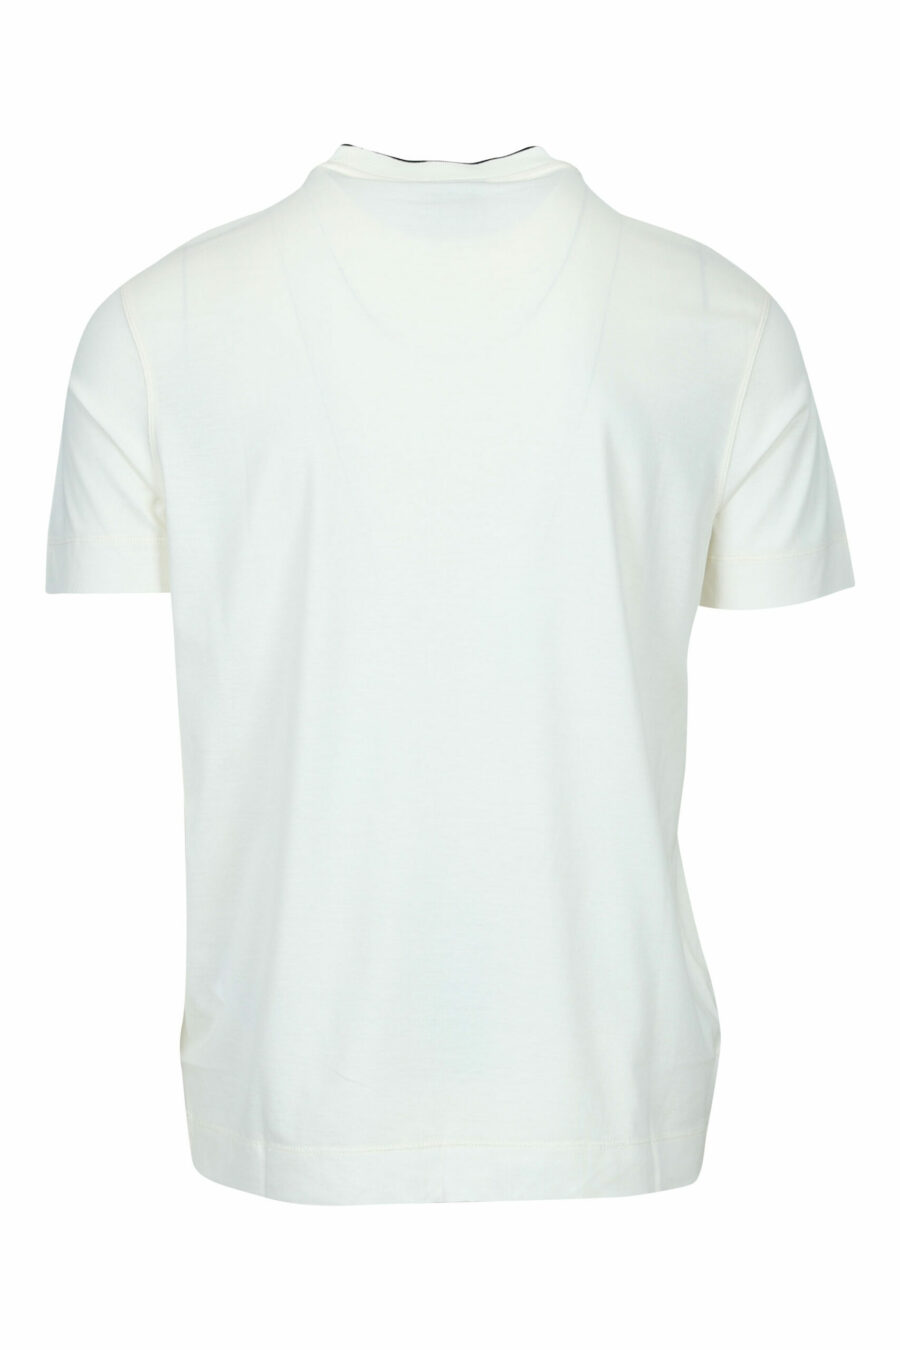 Cream-coloured T-shirt with centred eagle logo - 8058947986996 1 scaled